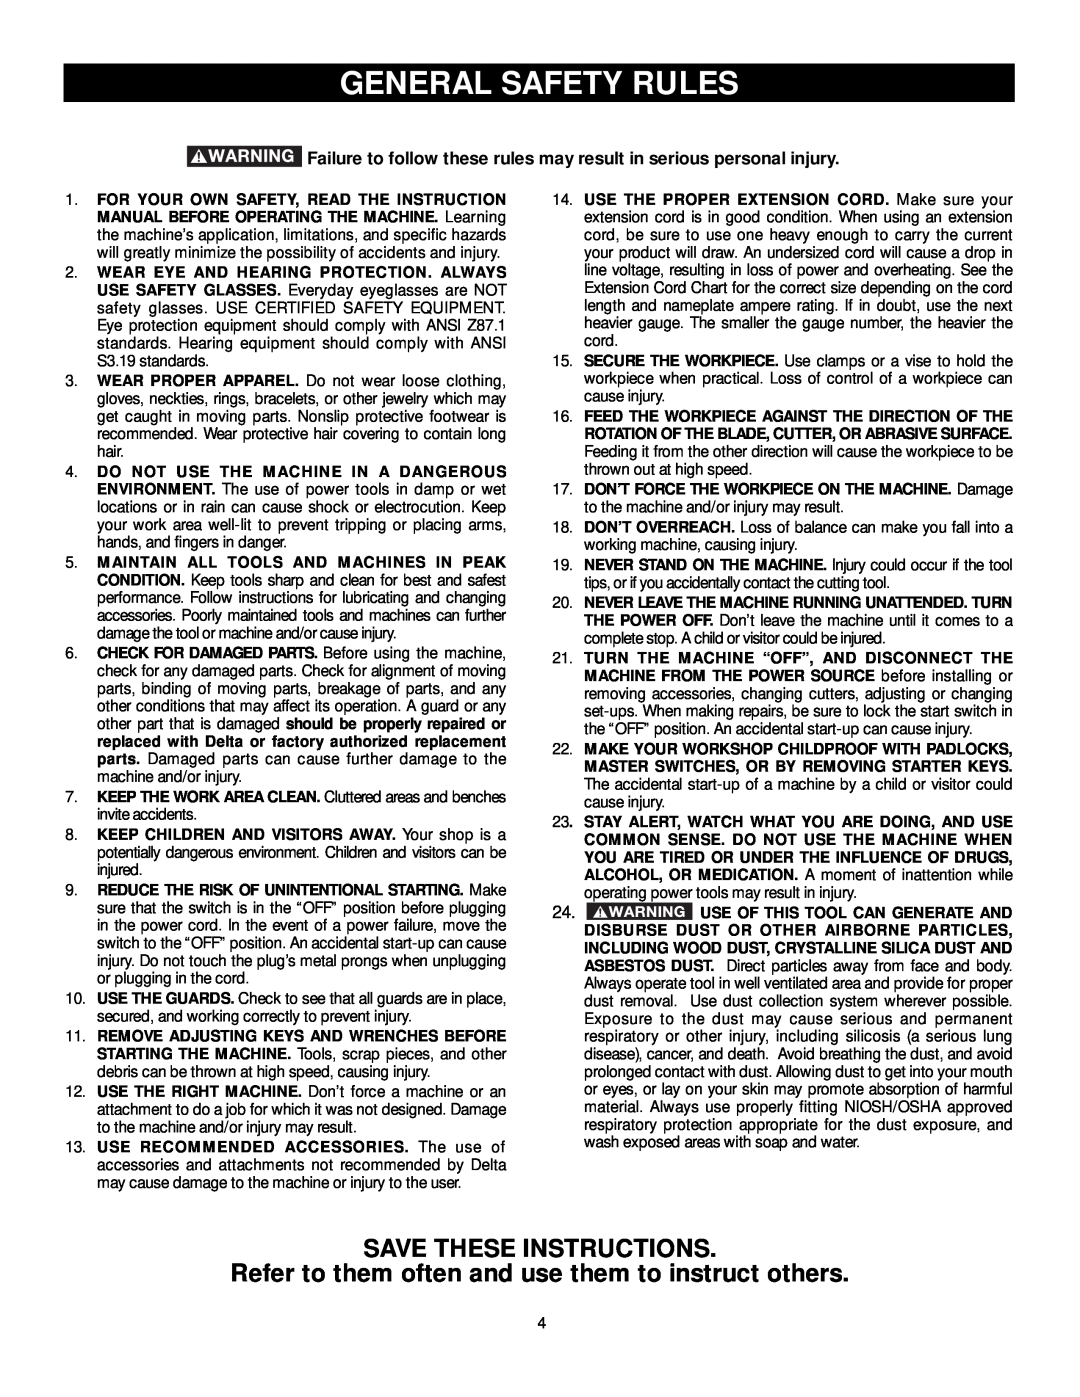 DeWalt 36-L51L, 36-L31X General Safety Rules, Save These Instructions, Refer to them often and use them to instruct others 